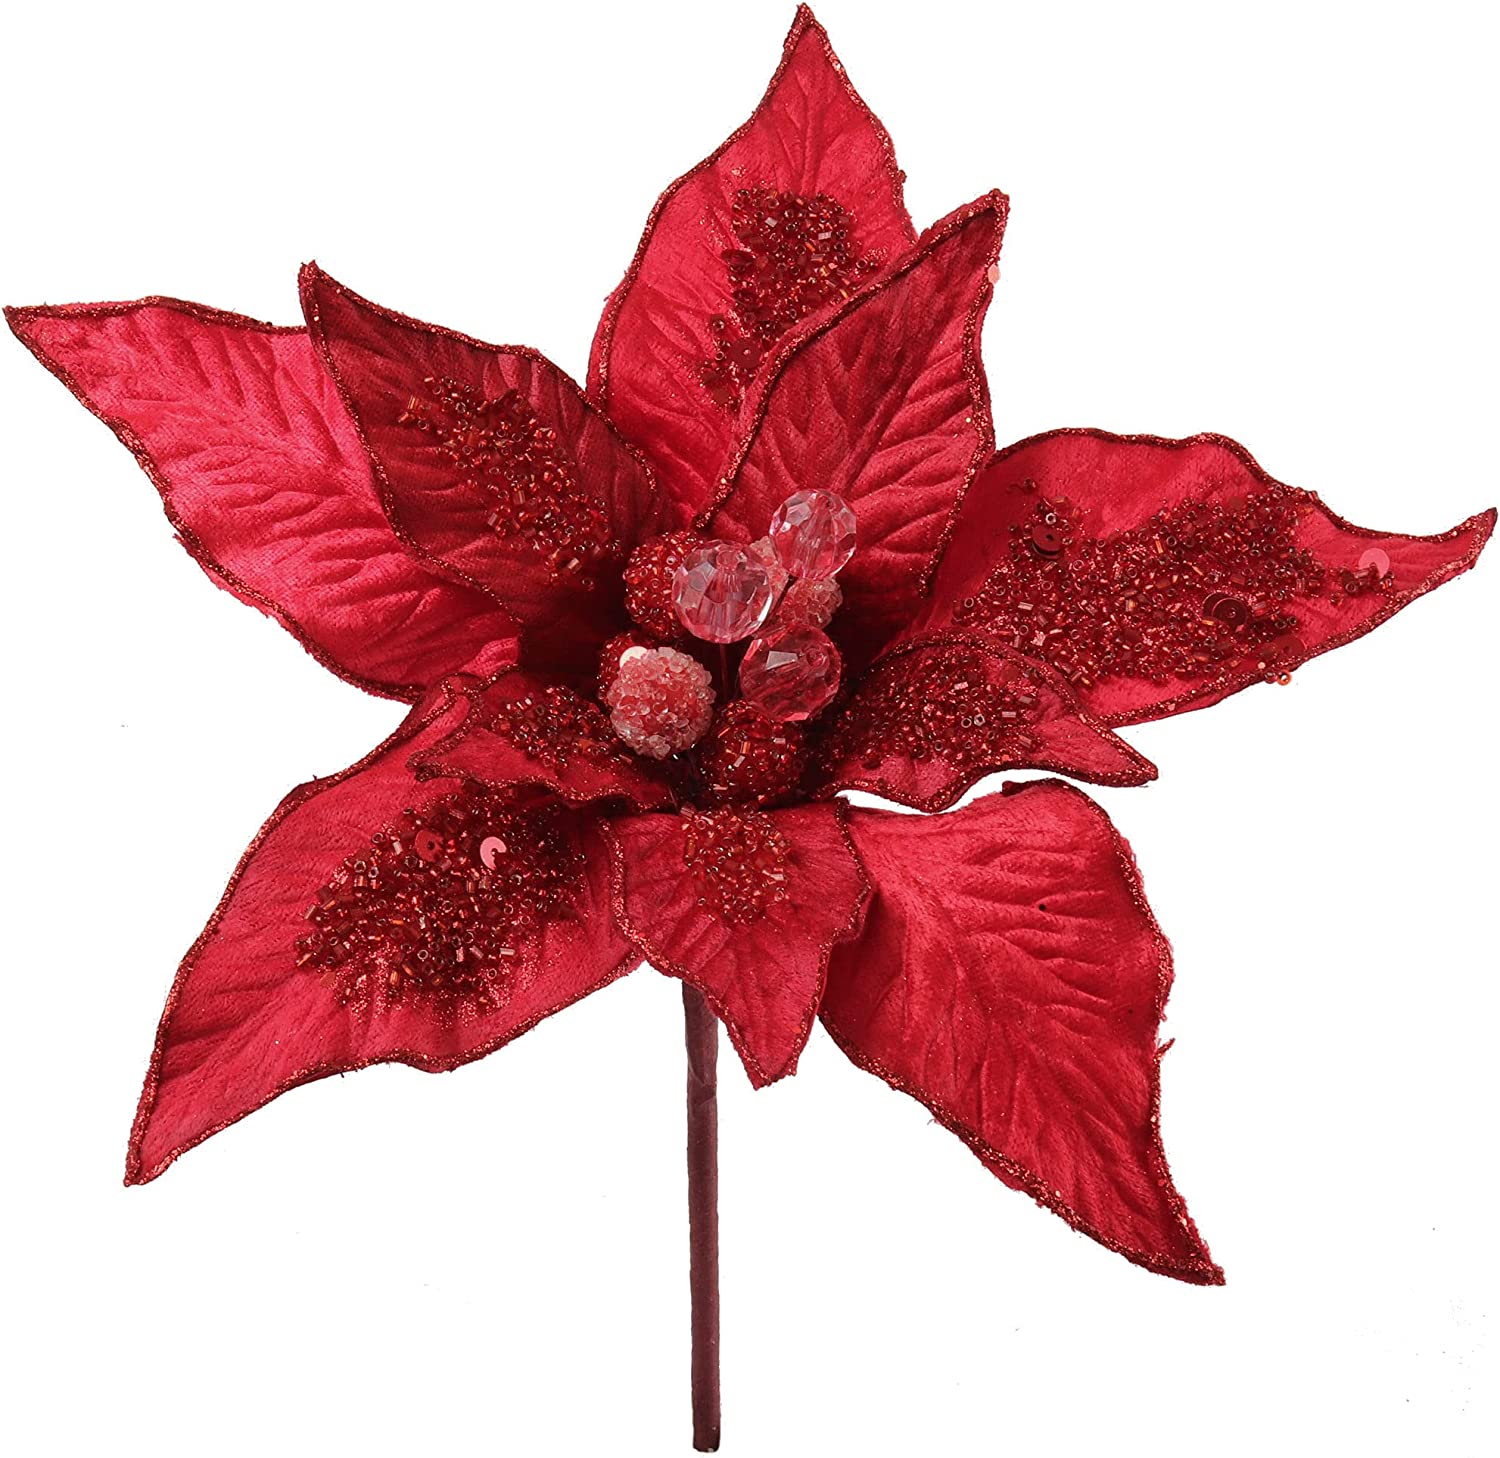 Premium 11-Inch Velvet Poinsettia Flower with 10 Lush Petals - Perfect for Holiday Decor